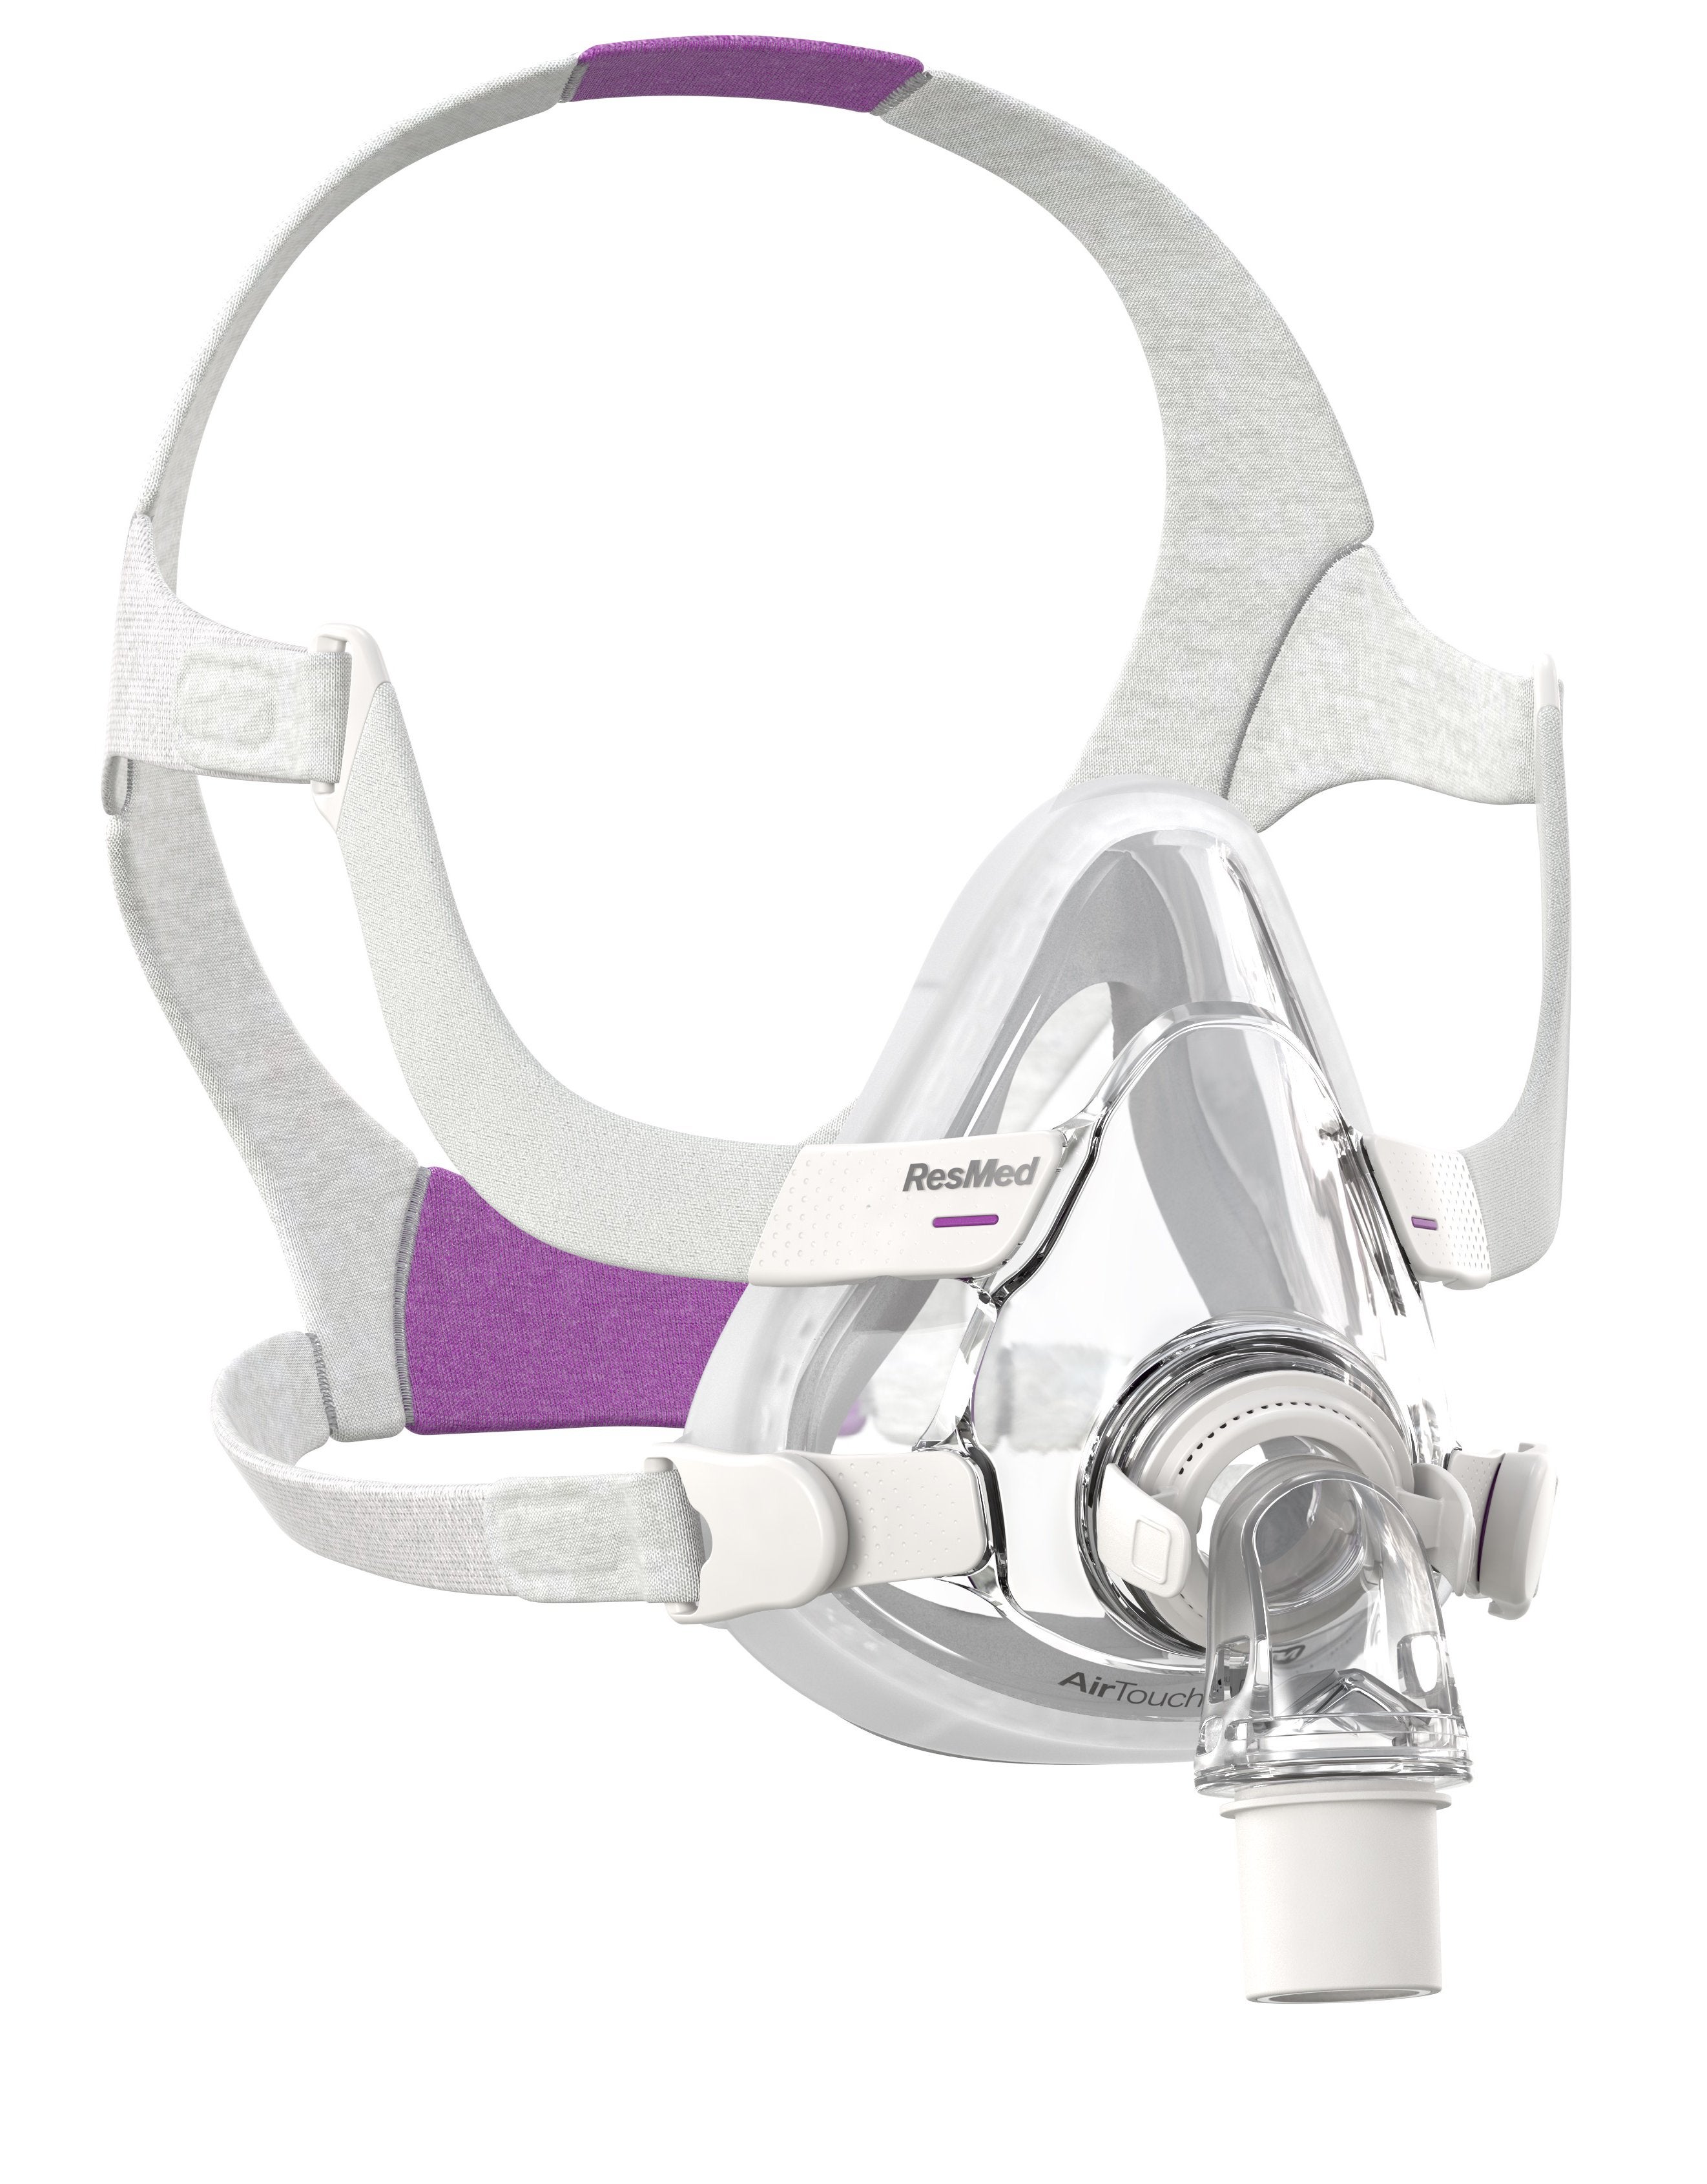 Resmed Airtouch™ F20 For Her Full Face Cpap Mask With Headgear 1544